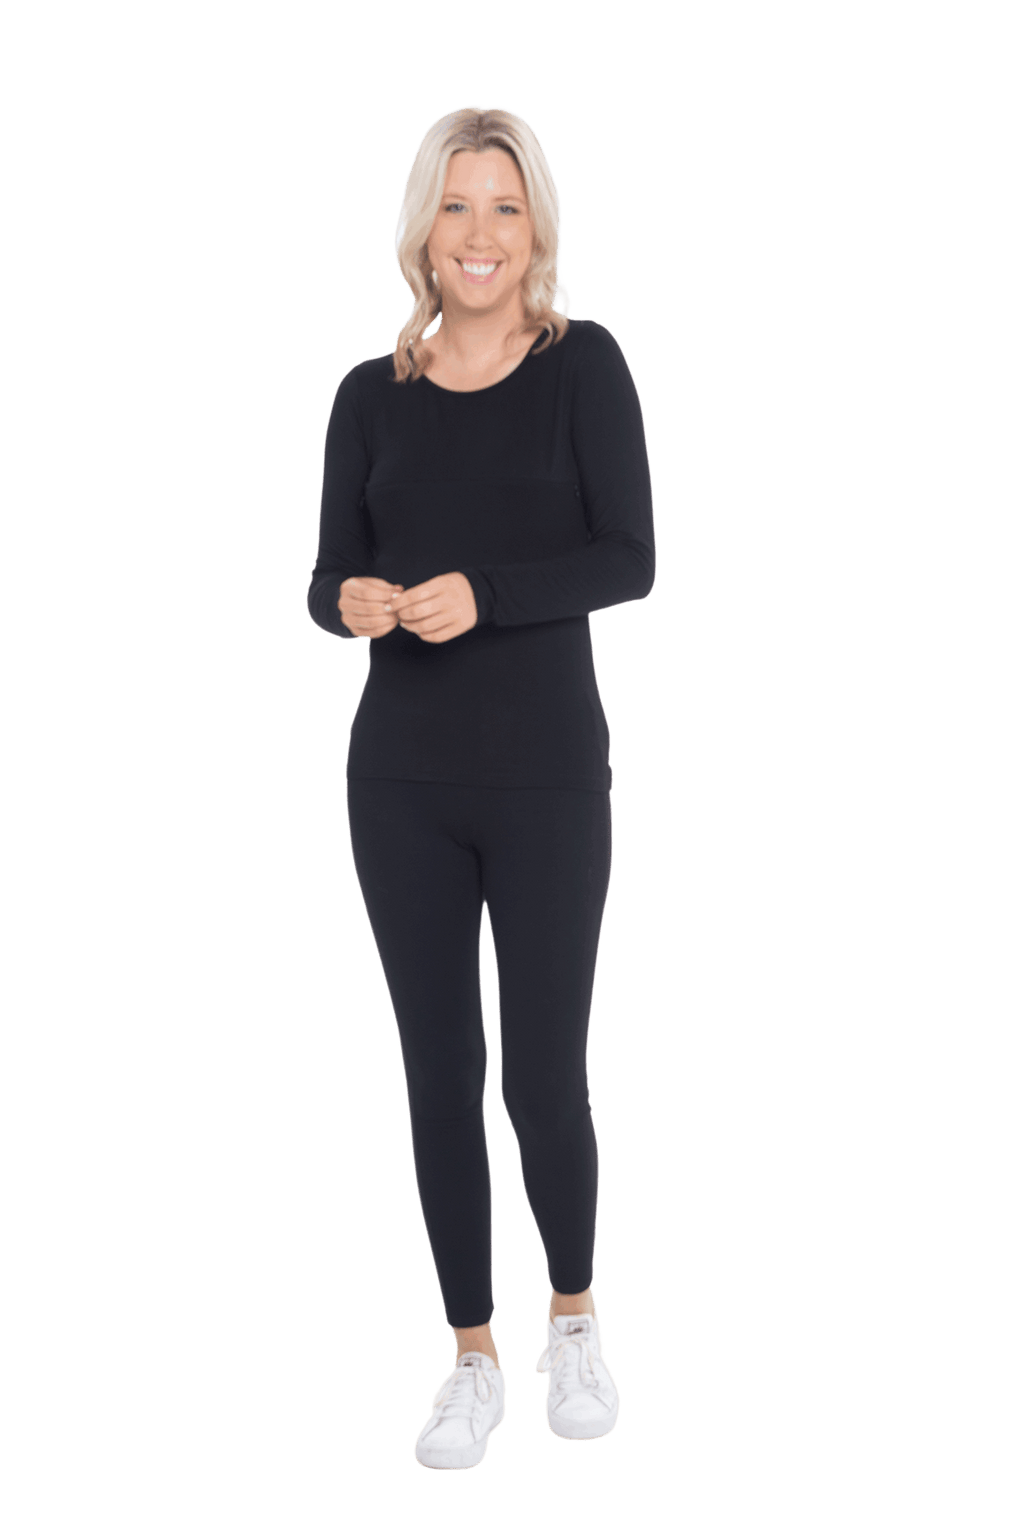 Petite model facing camera wearing black, long sleeved tee, features rounded neckline. Cindy available in sizes 6-26